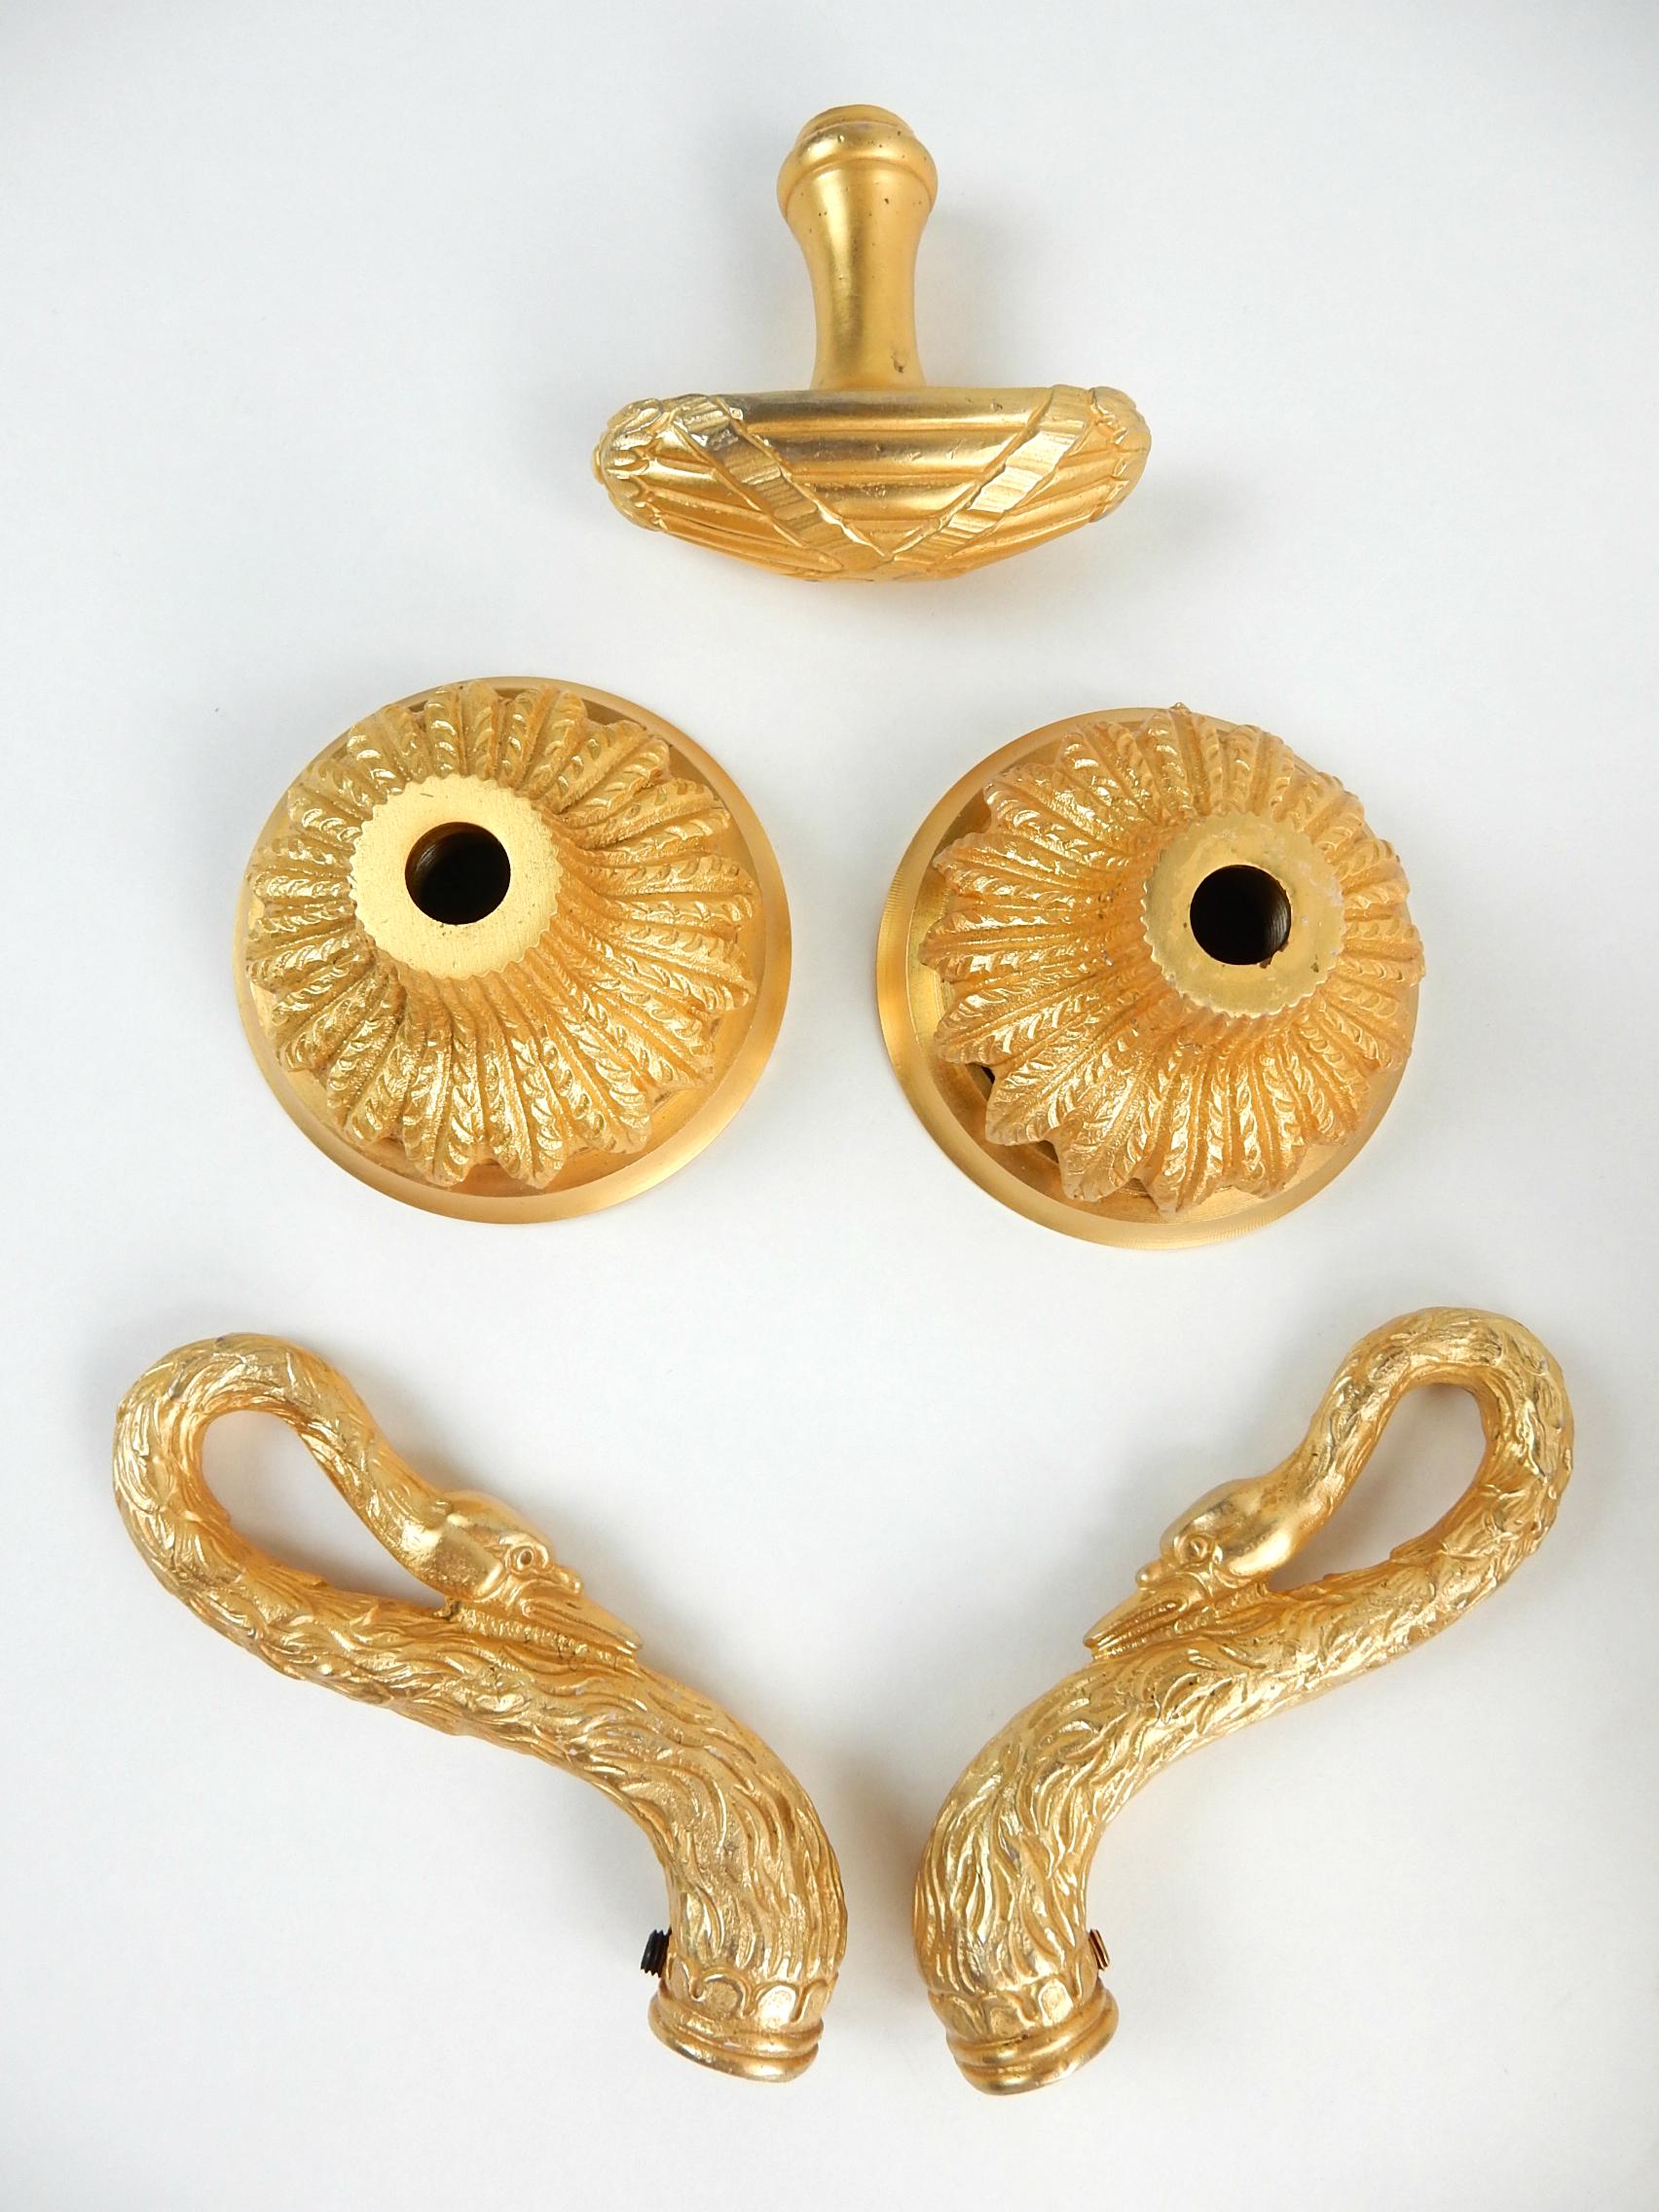 Huge golden swan bath tub spout and escutcheon from the early 1960s collection of Sherle Wagner.
Set also includes figural swan hot and cold handles, wall escutcheon and flow T handle.
All are 22-karat gold plated with gorgeous luster.
No behind